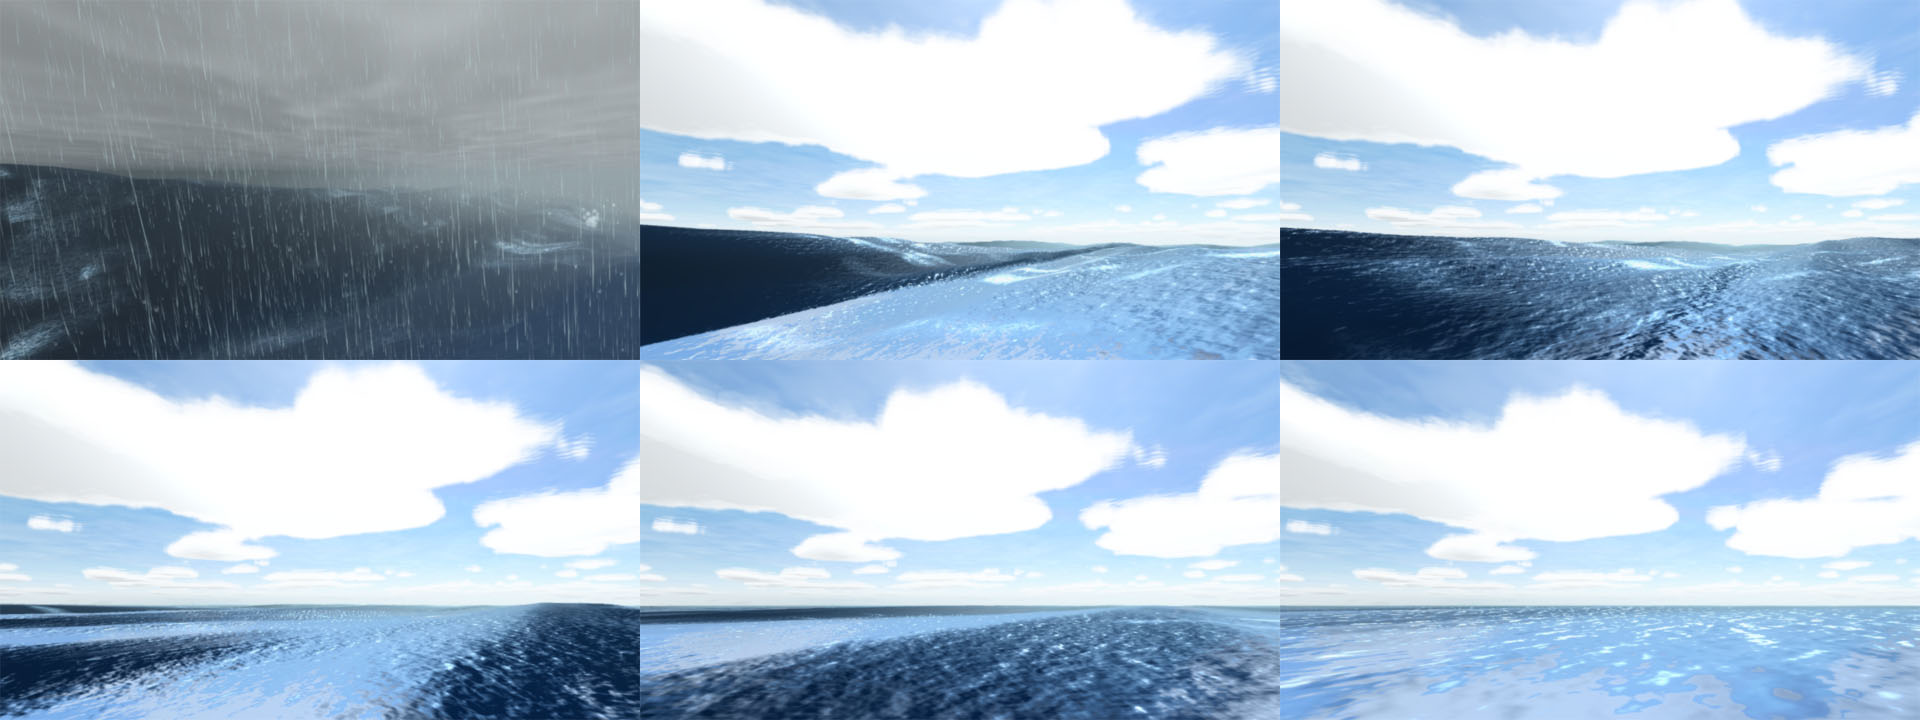 Ocean waves in the new shader, varying from sunny and peaceful to rough and frightening.